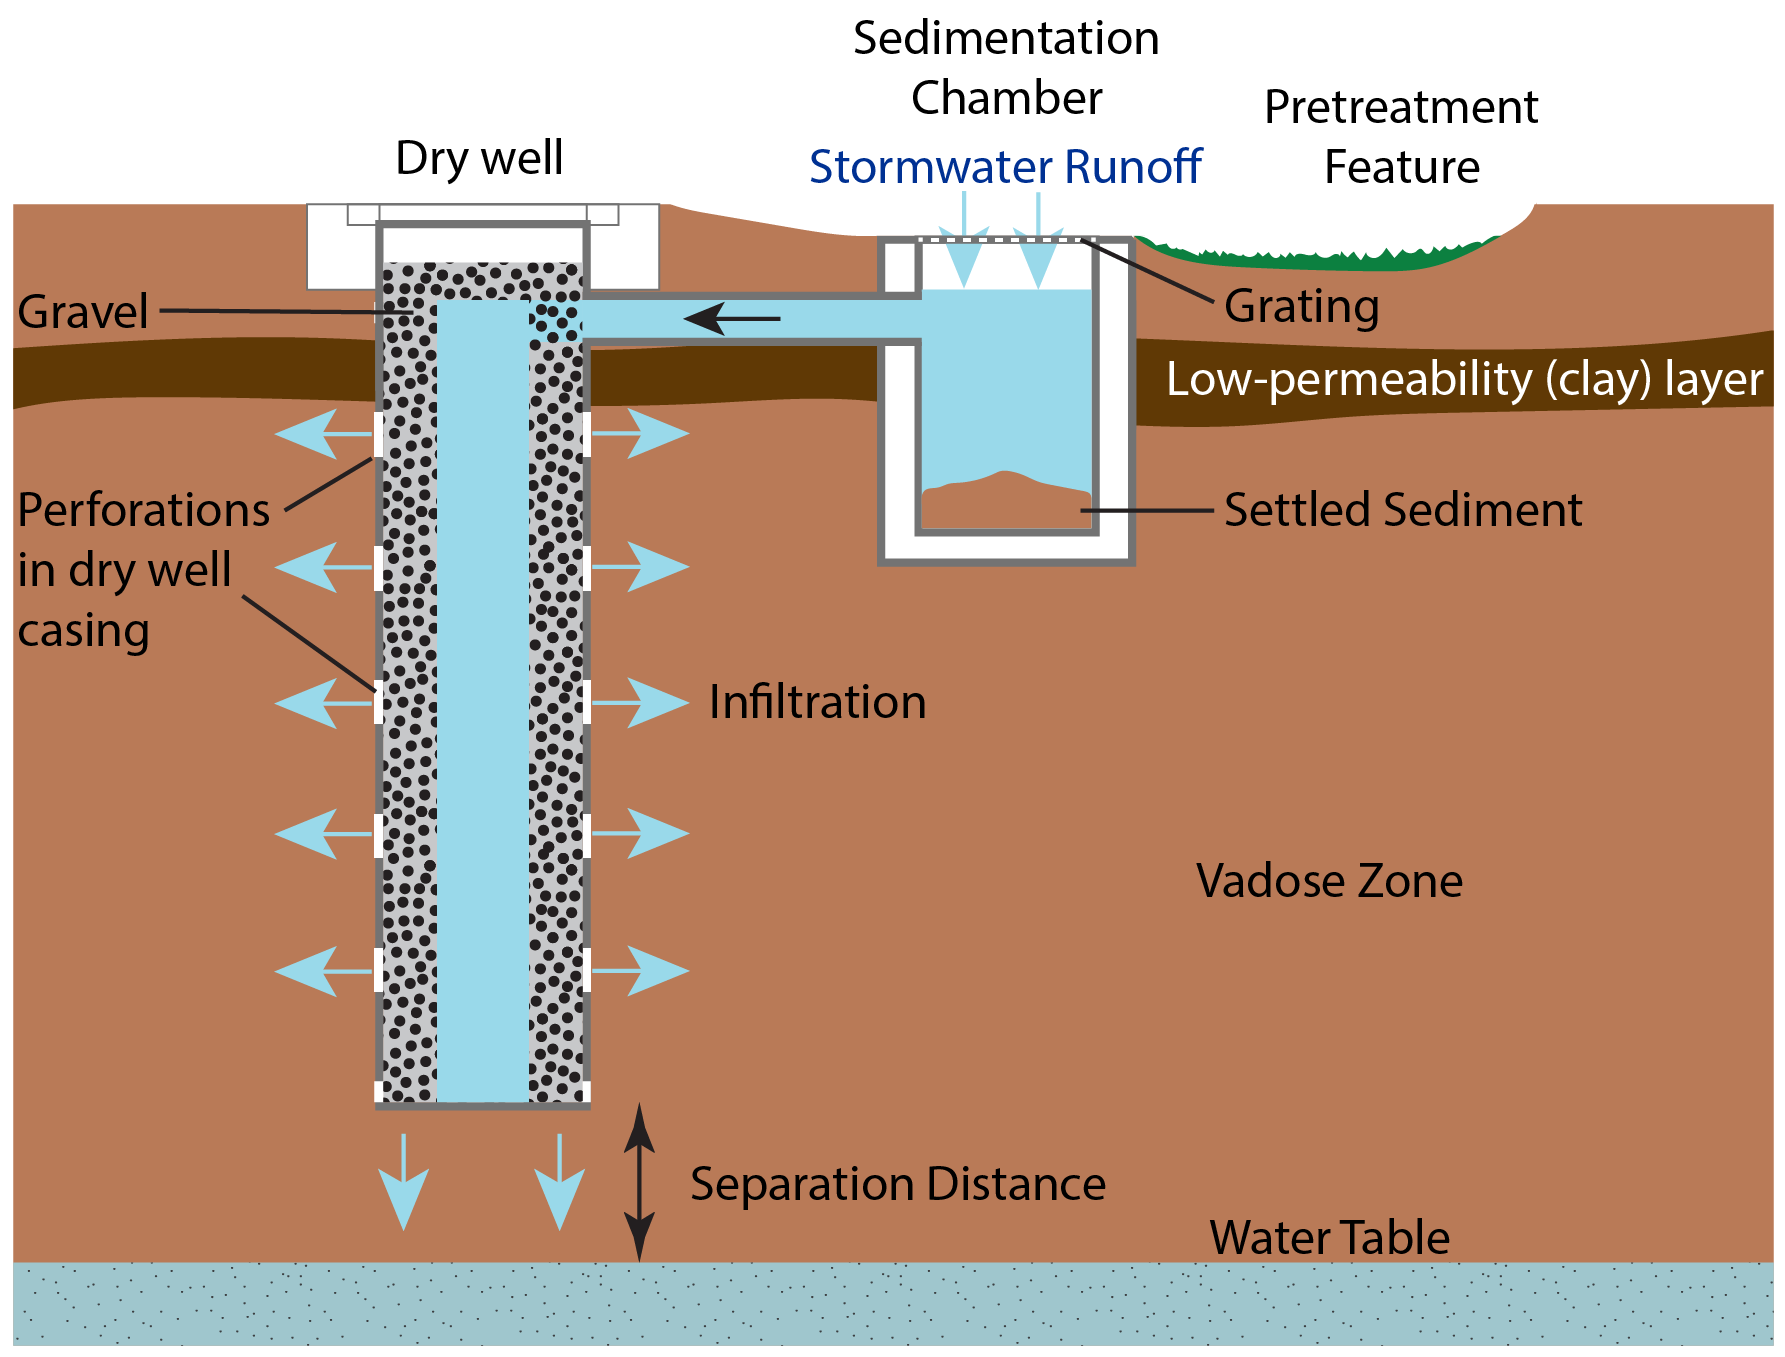 Typical dry well design with pretreatment features (not to scale). Arrows indicate the flow of stormwater through the dry well system and into the surrounding sediment and rock.